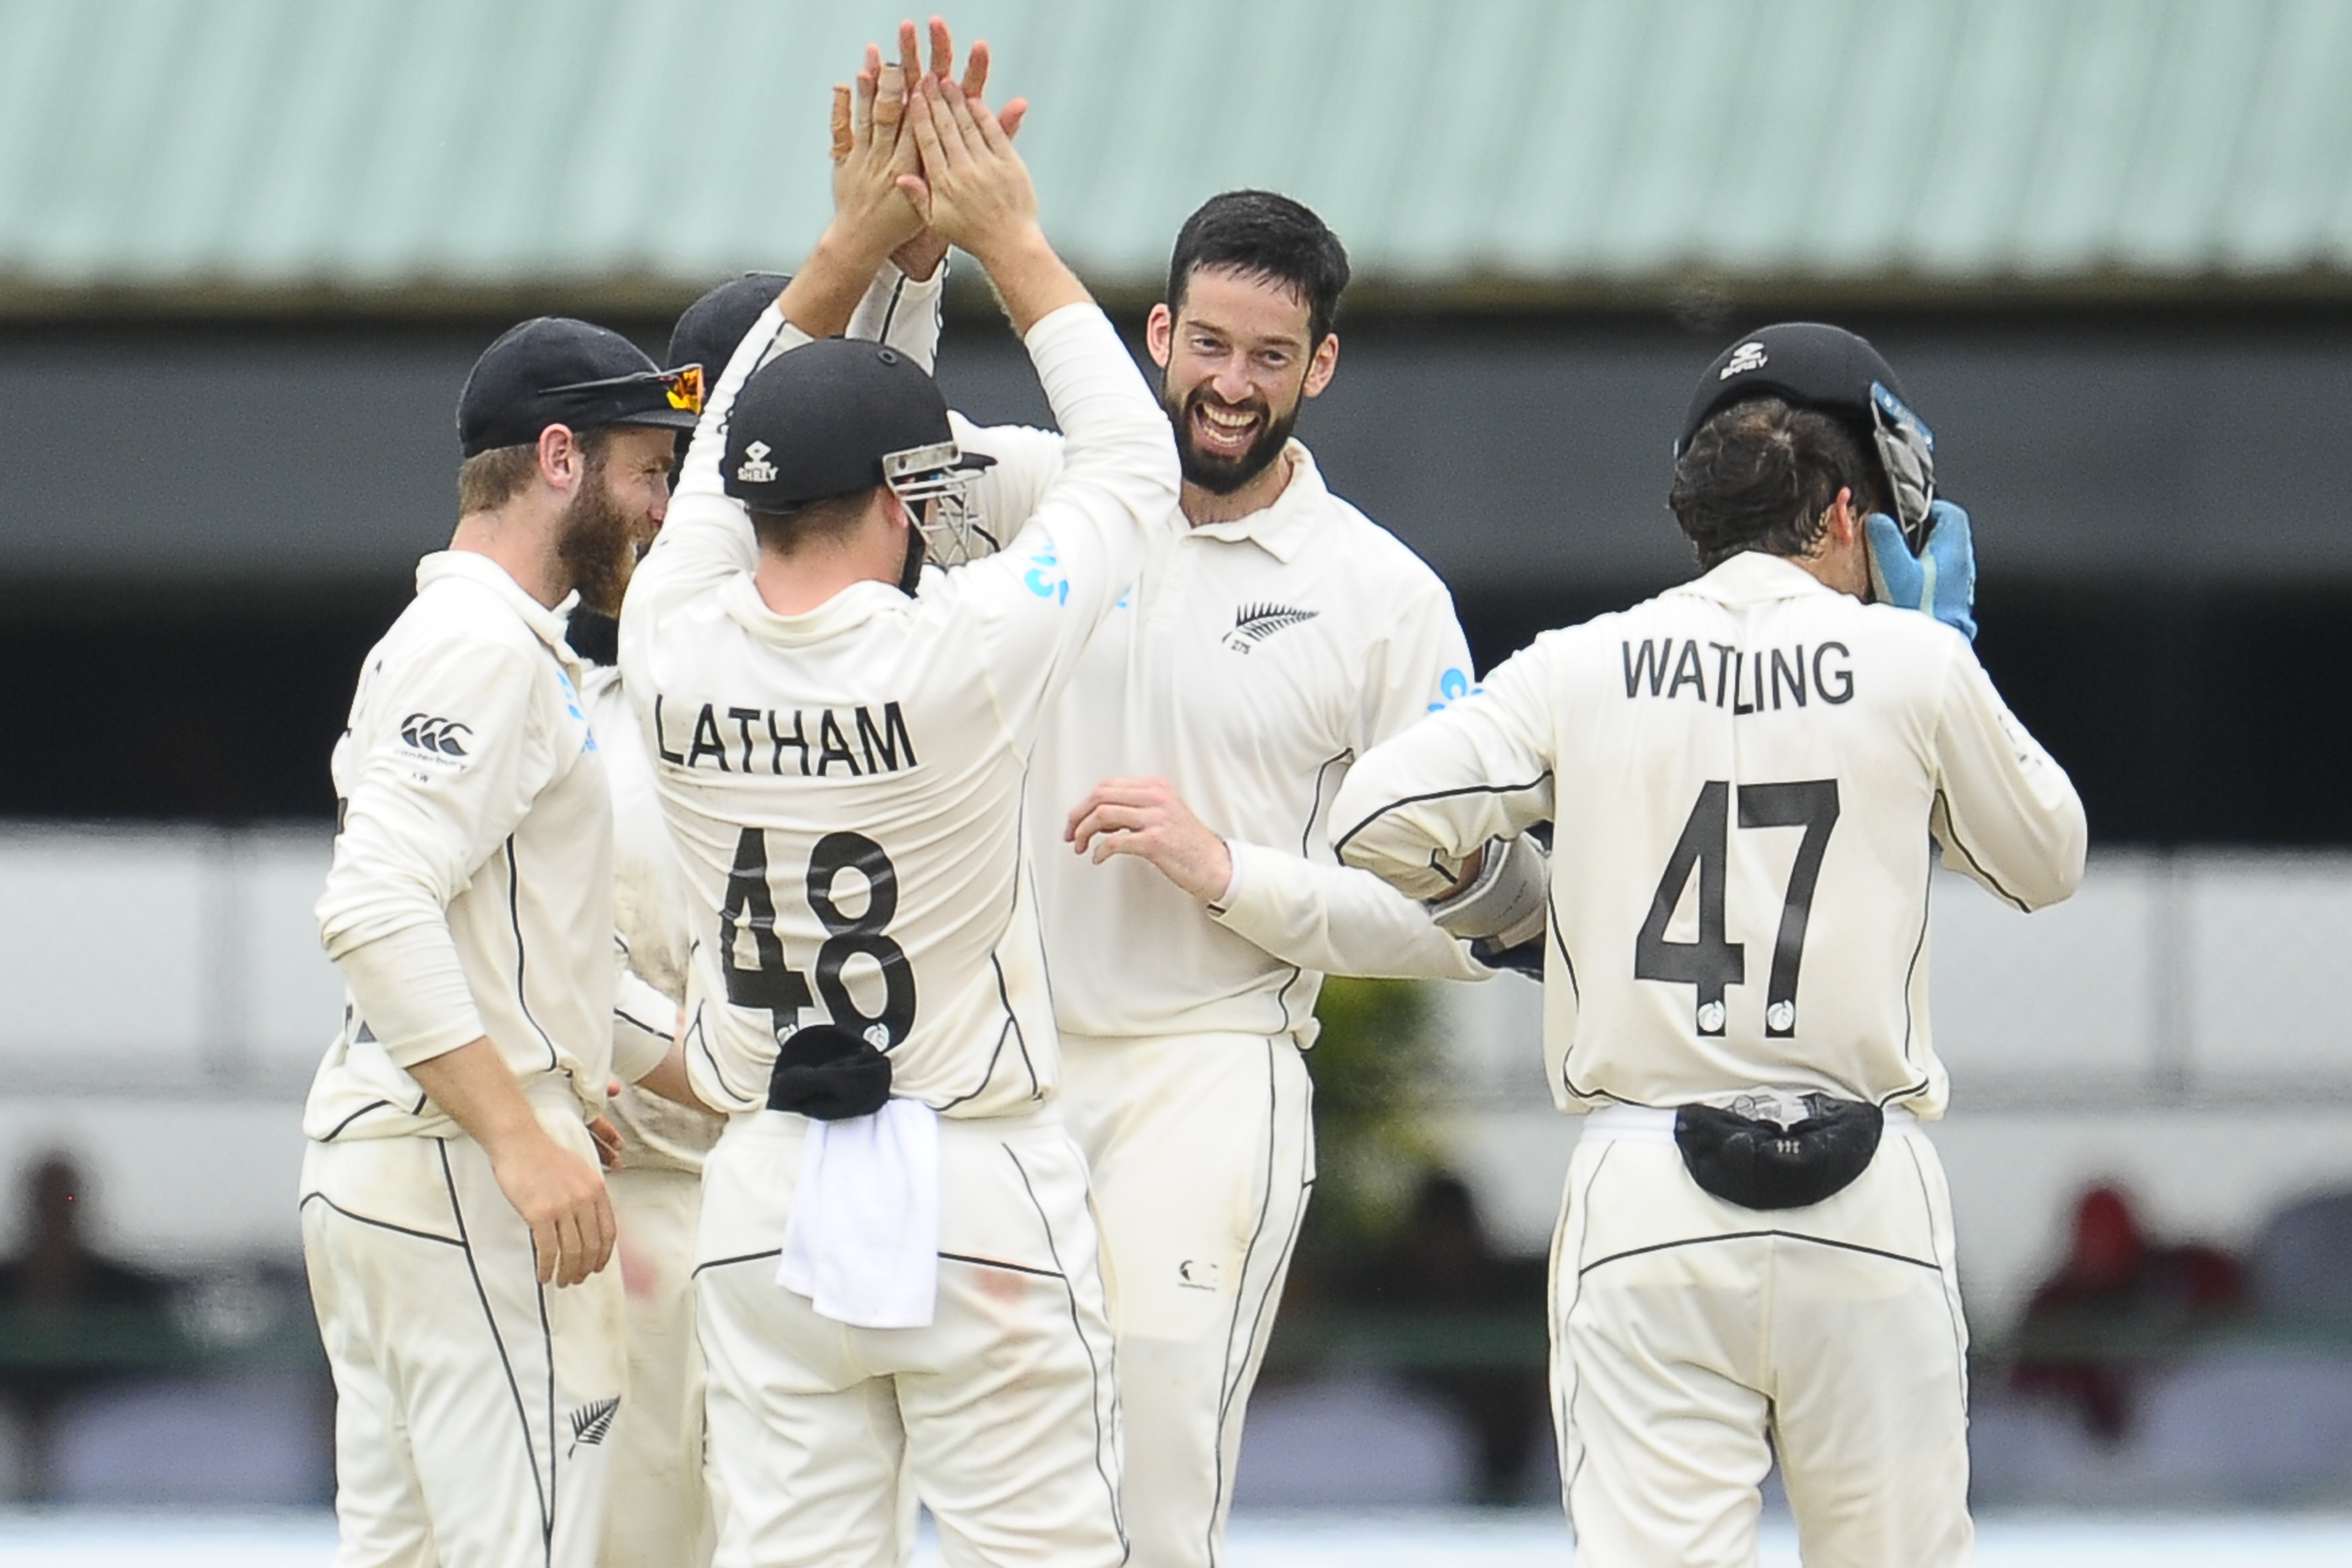 New Zealand wins by an innings and 65 runs to square series